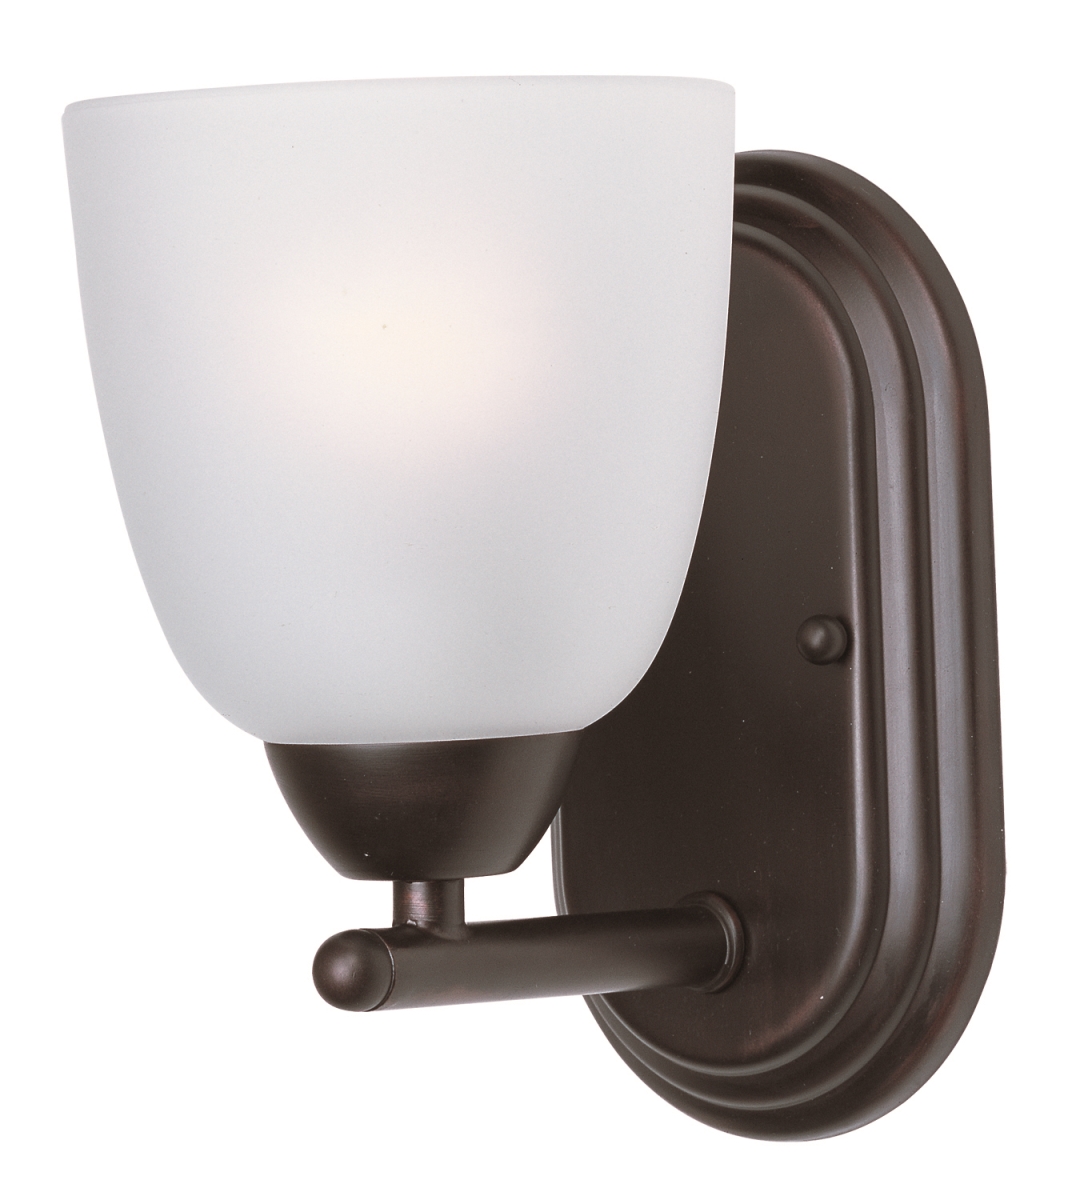 11311ftoi 8 X 5 In. Axis One Light Wall Sconce, Oil Rubbed Bronze